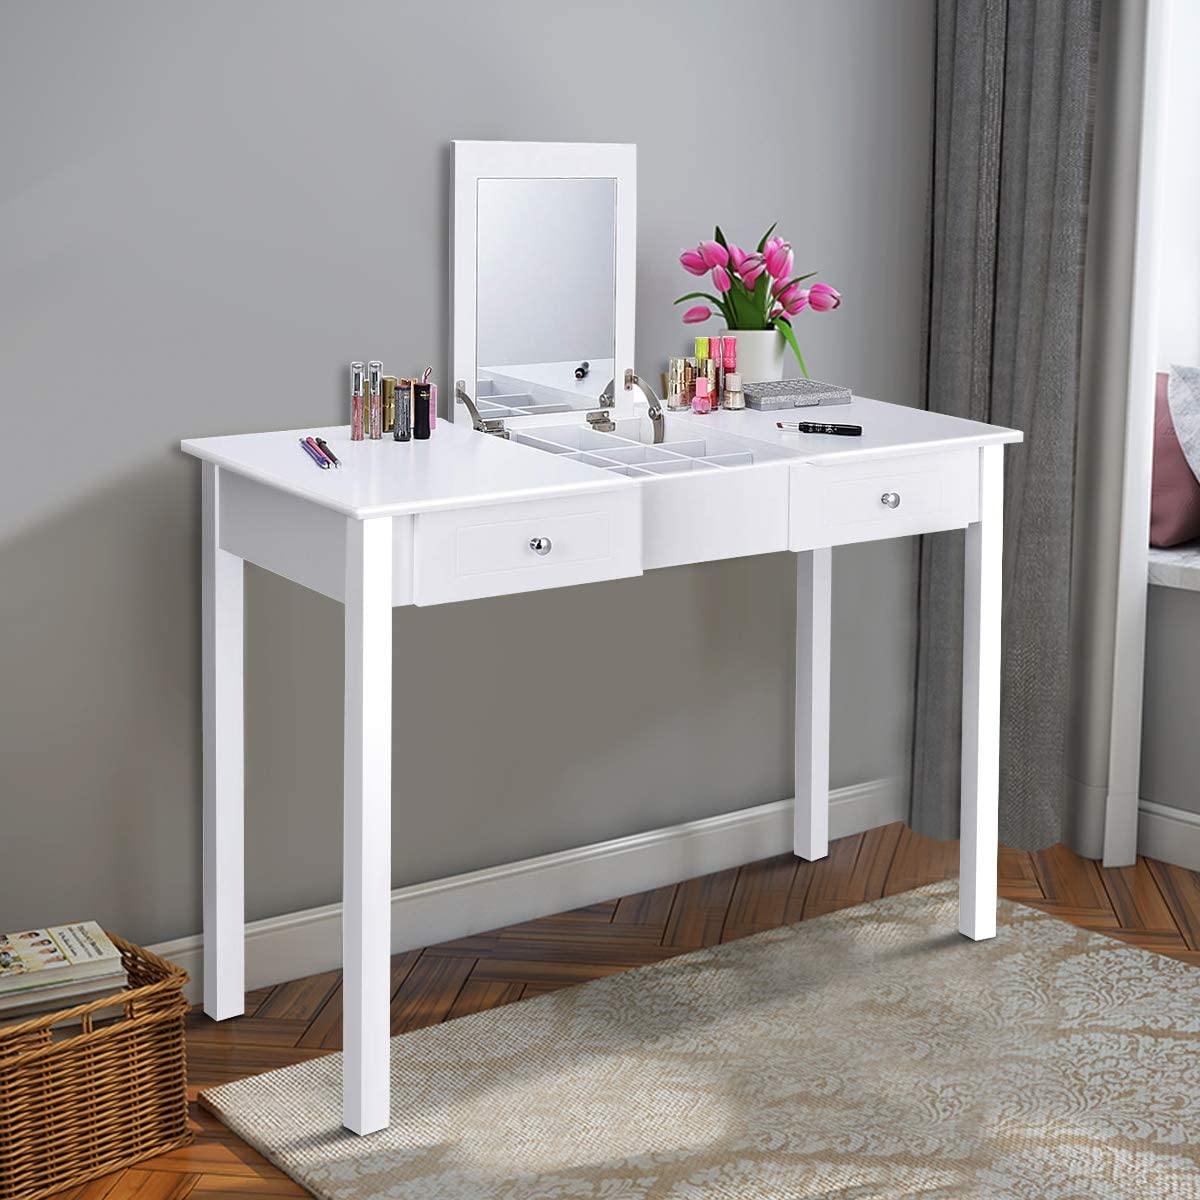 Vanity Table with Flip Top Mirror Easy Assembly, White - Giantexus